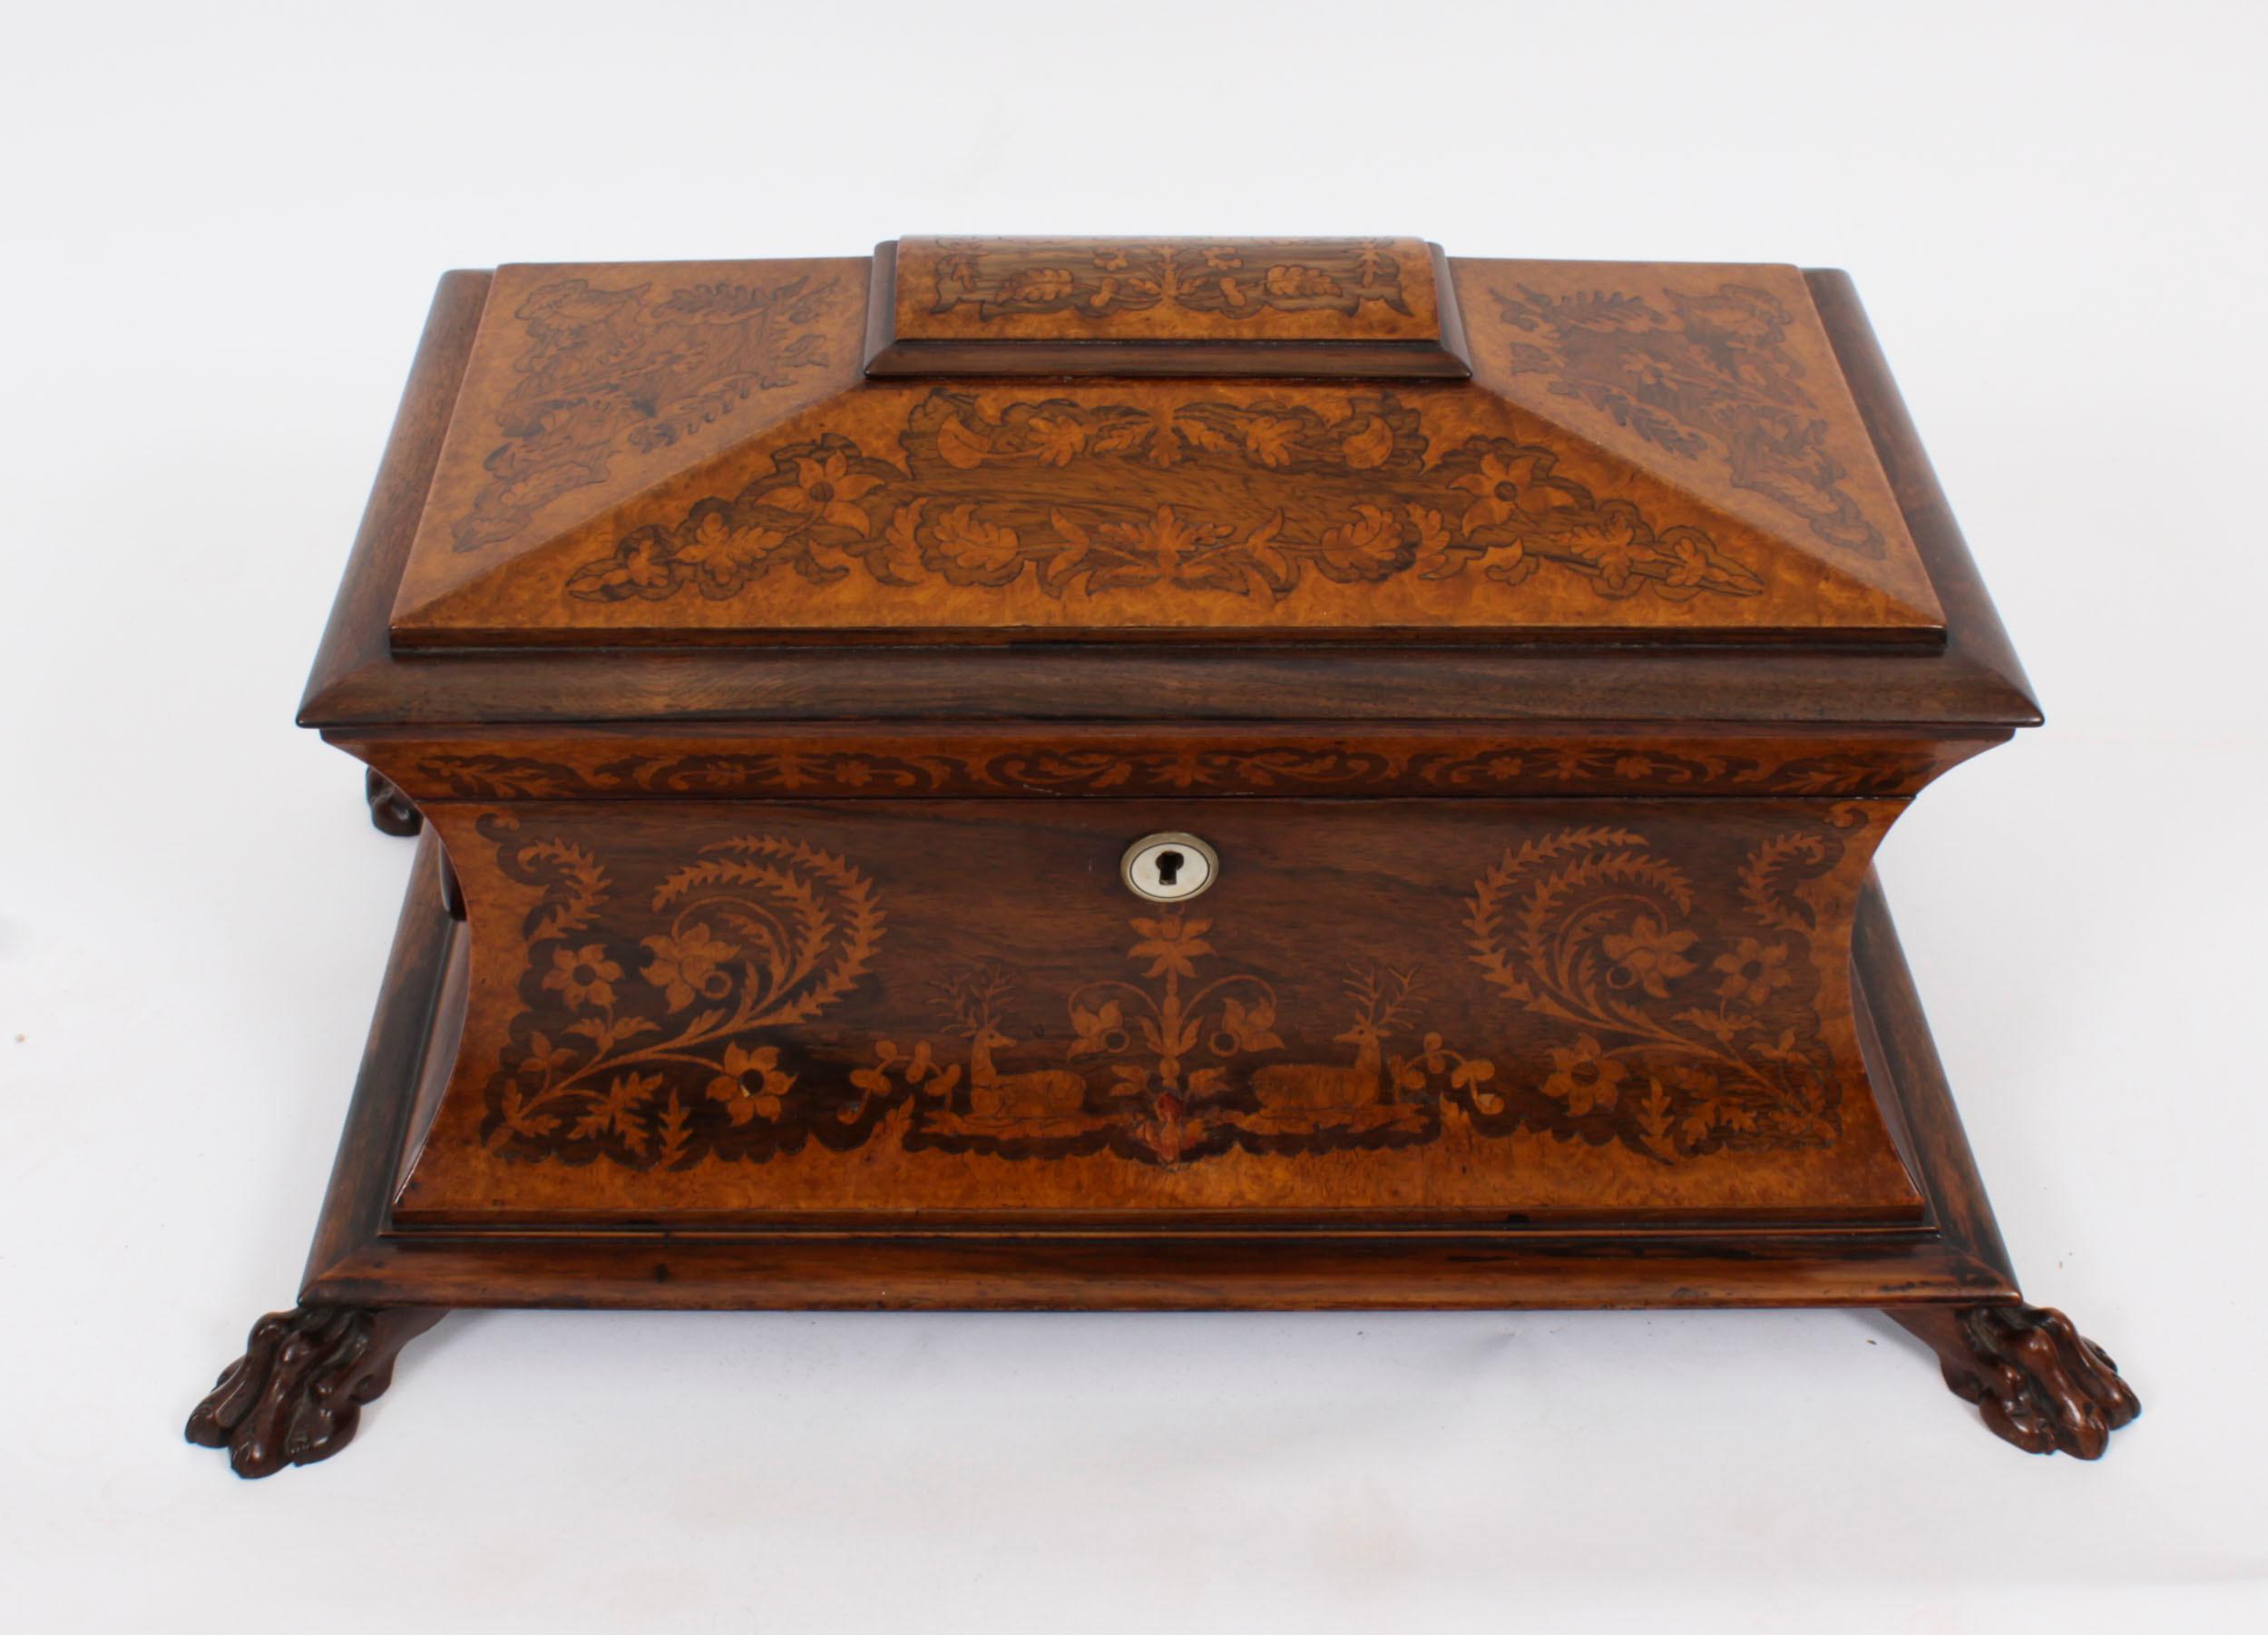 This is an exquisite antique George IV Gonçalo Alves and amboyna marquetry inlaid tea caddy, circa 1825 in date.

It is beautifully decorated with superb marquetry decoration to the Gonçalo Alves and amboyna.

Of sarcophagus form, the lid enclosing